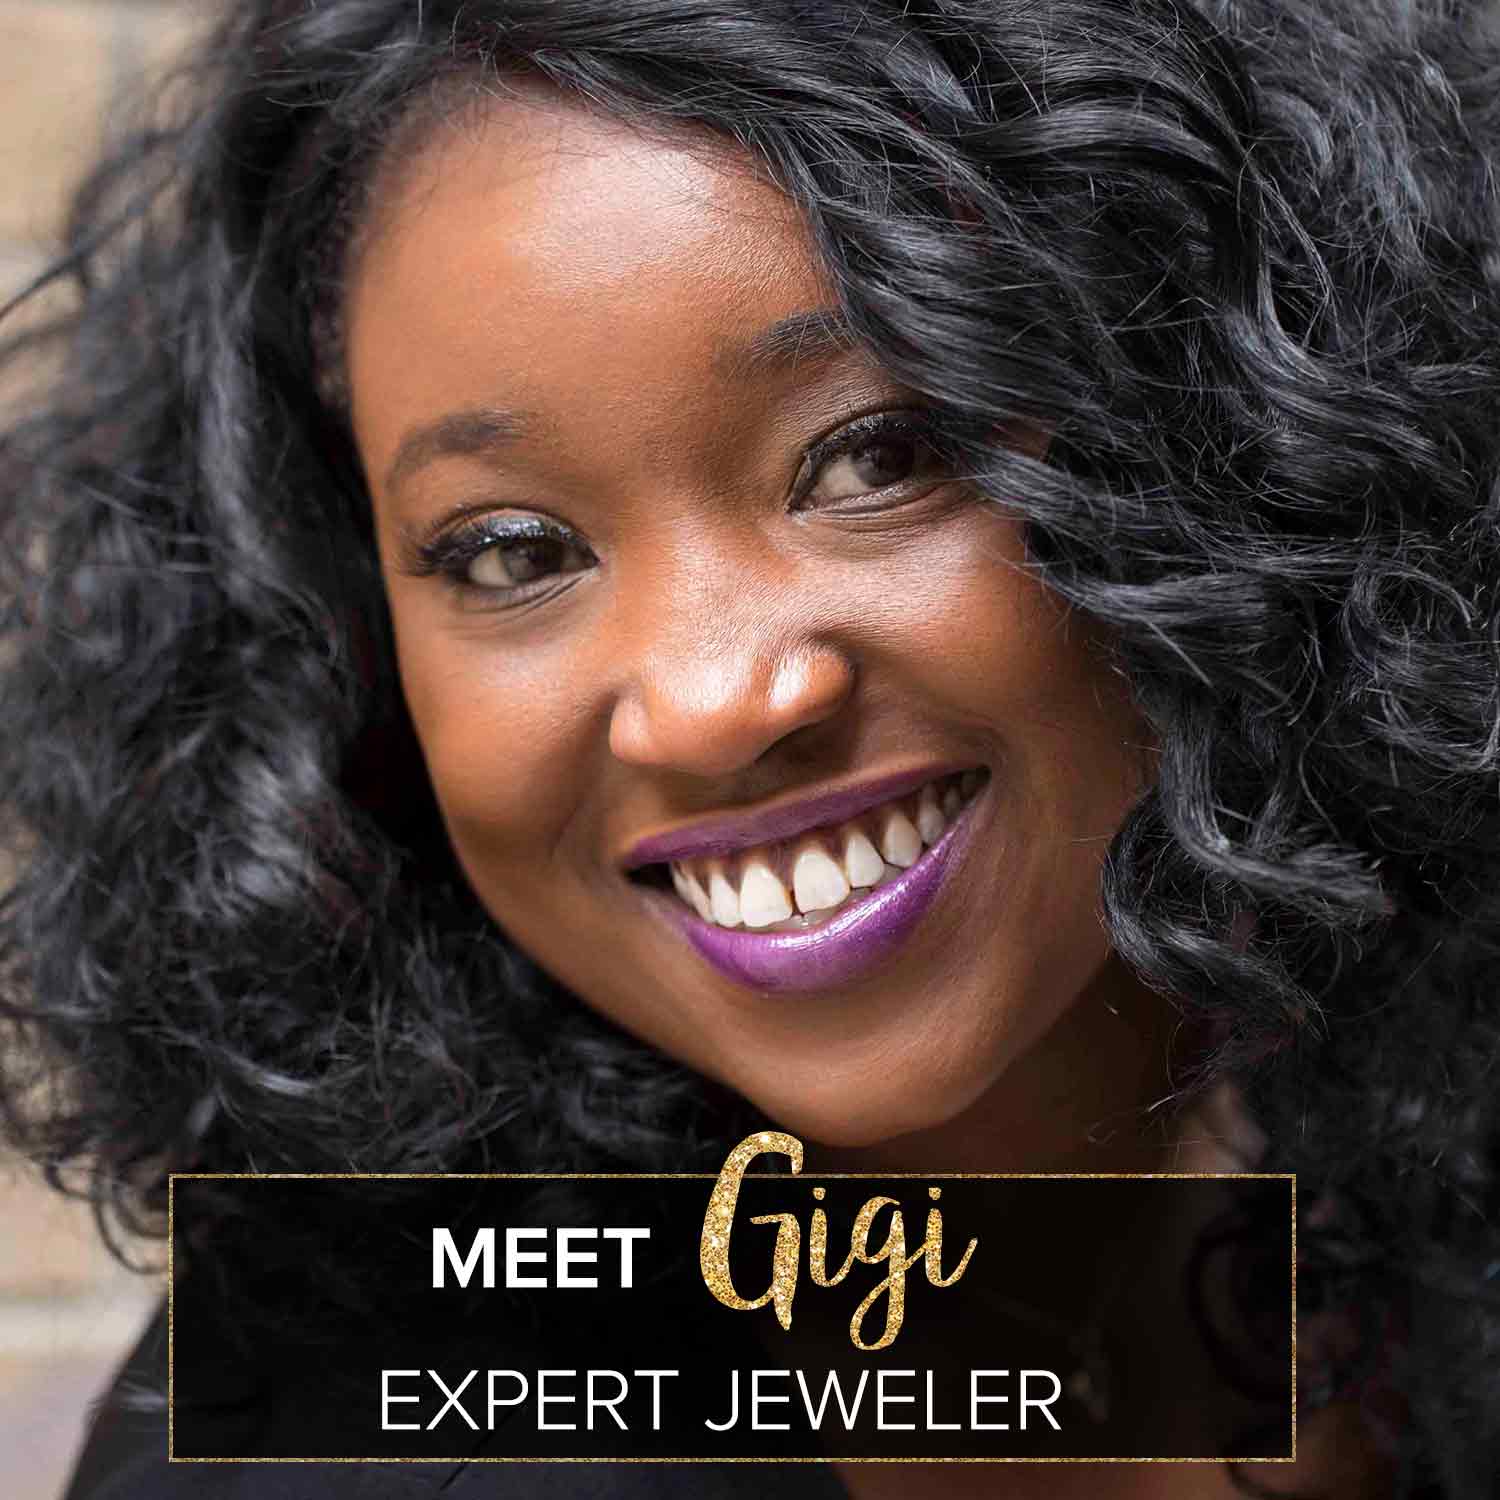 A picture of our expert jeweler, Gigi